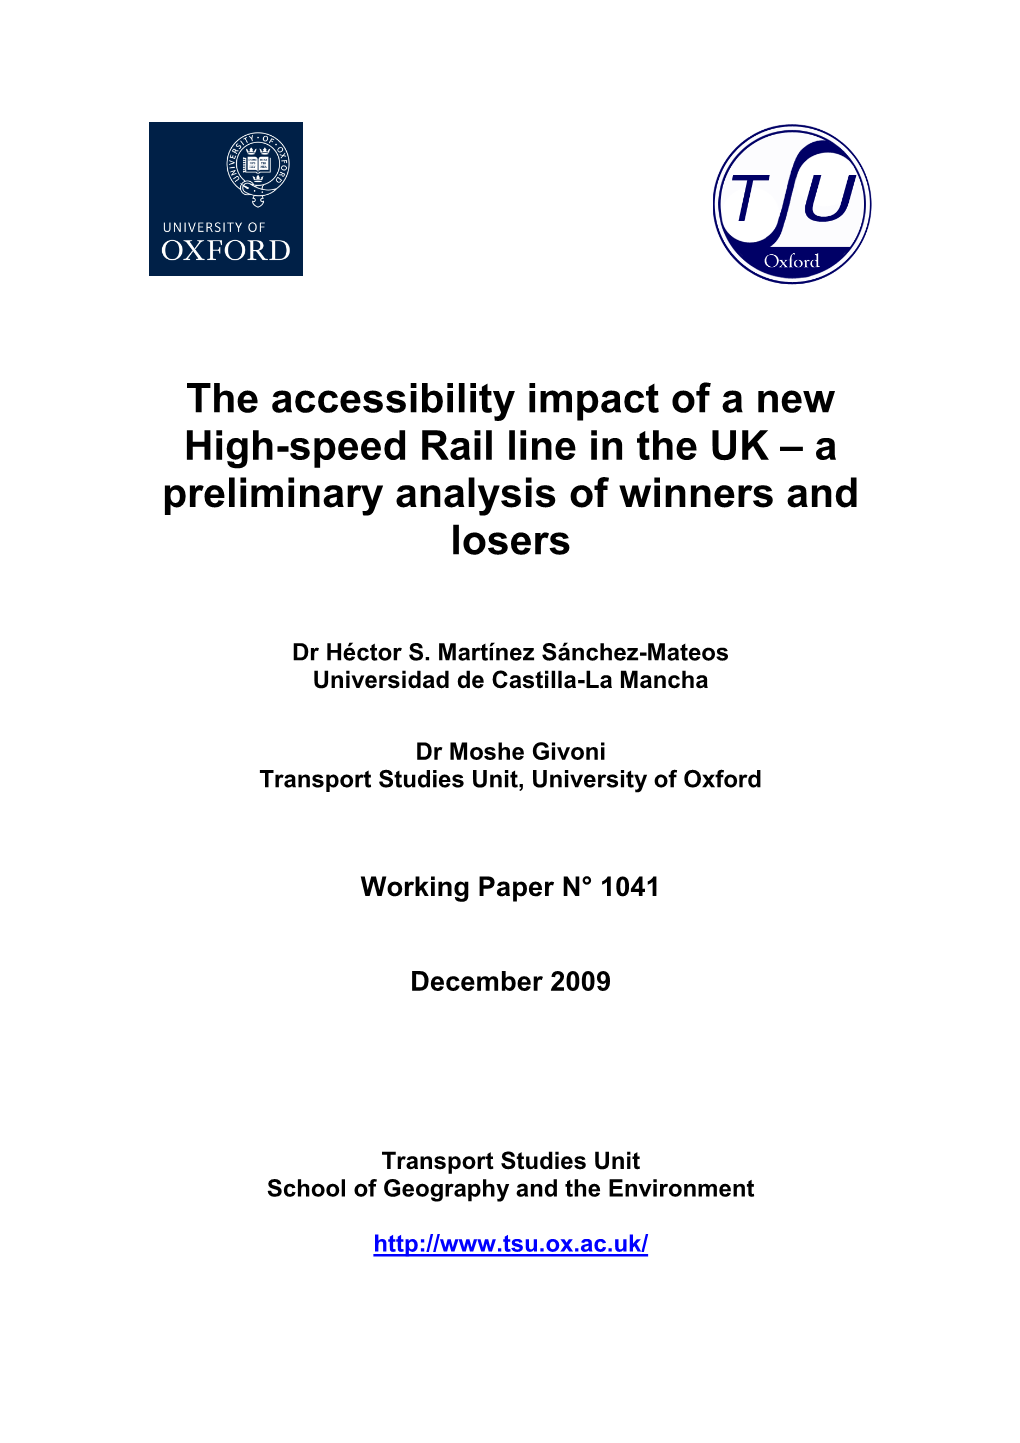 The Accessibility Impact of a New High-Speed Rail Line in the UK – a Preliminary Analysis of Winners and Losers